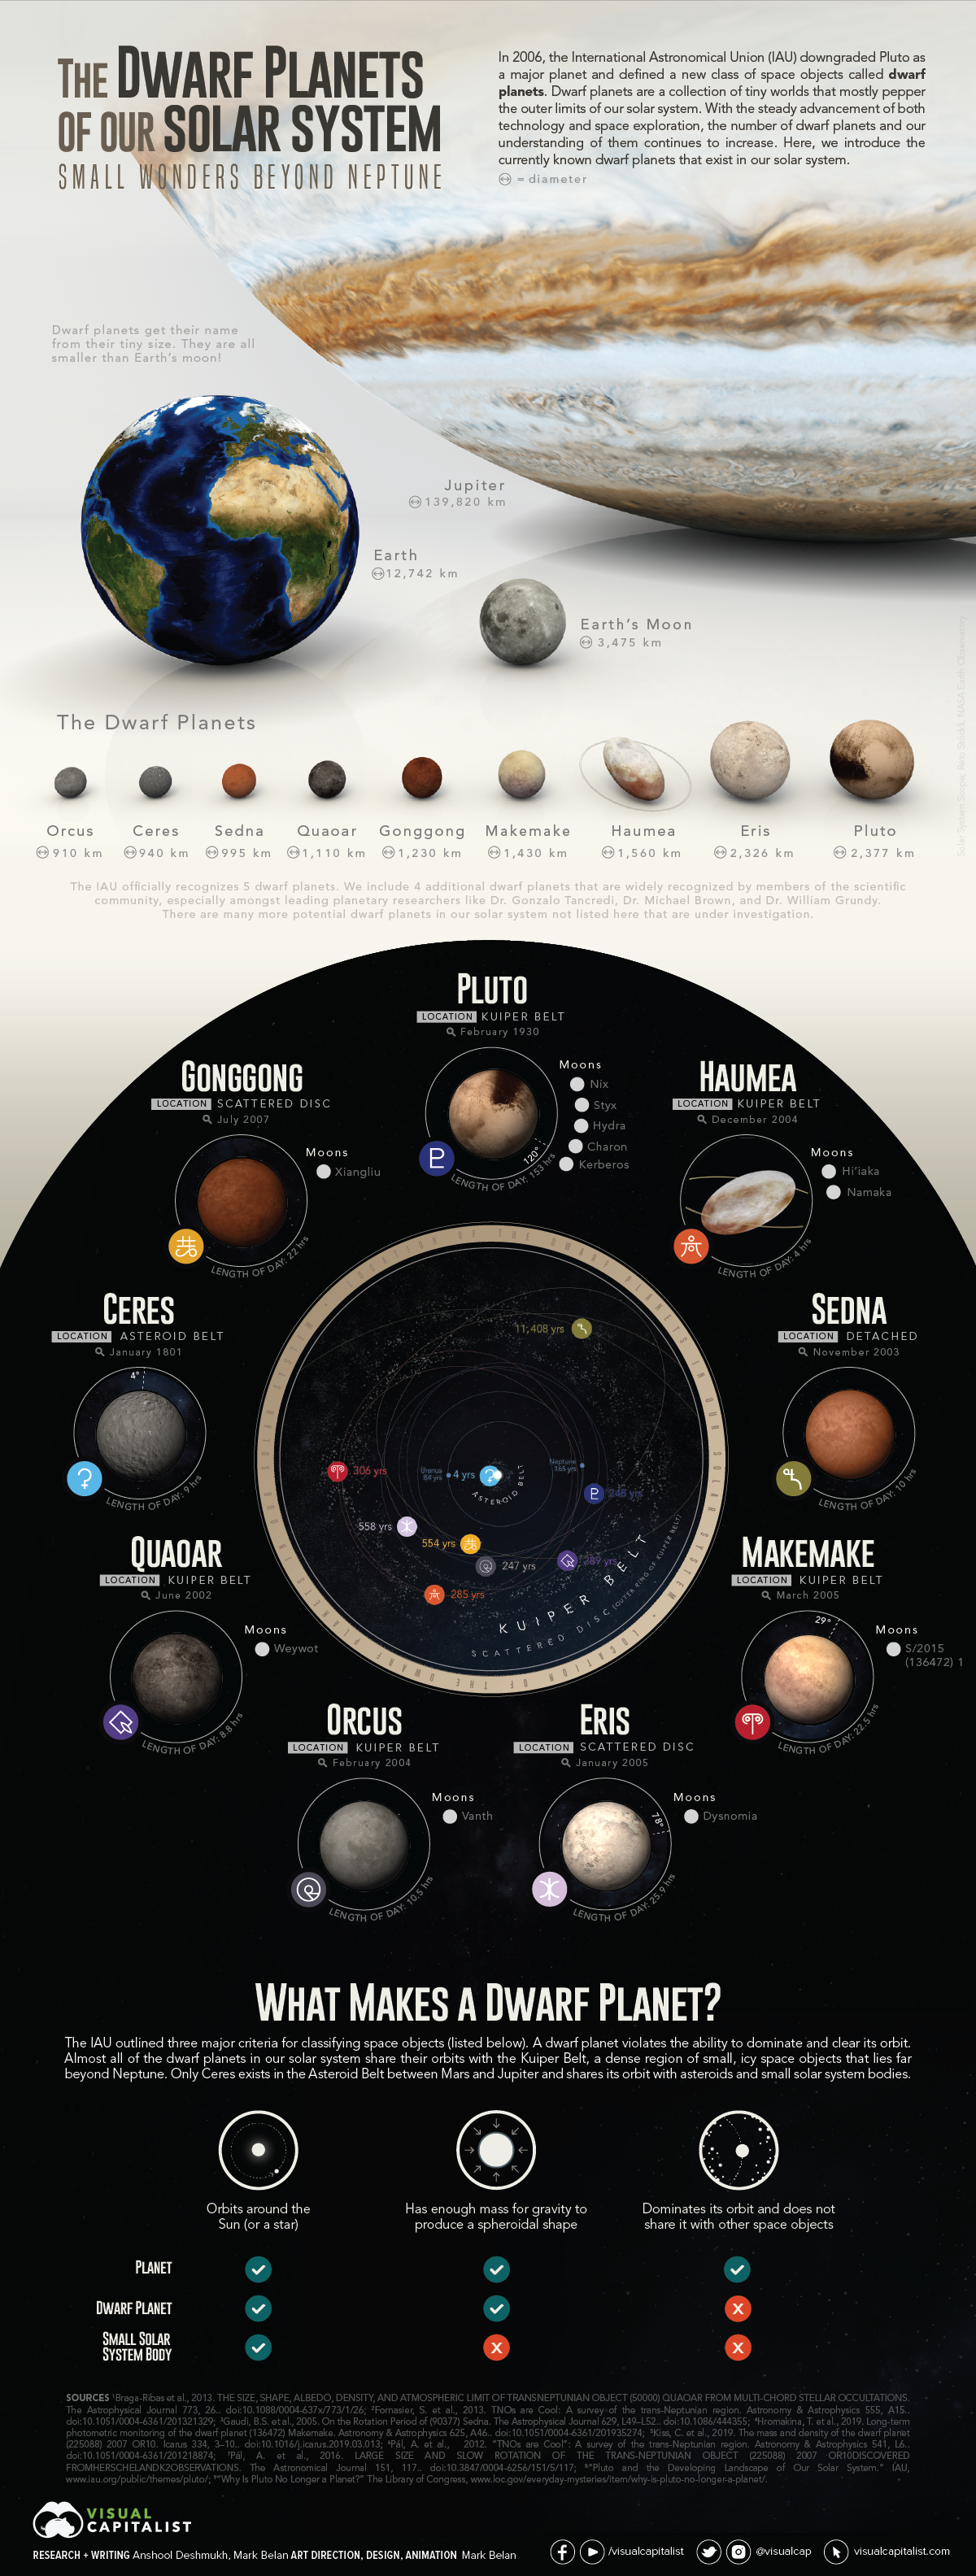 solar system with asteroid belt and dwarf planets